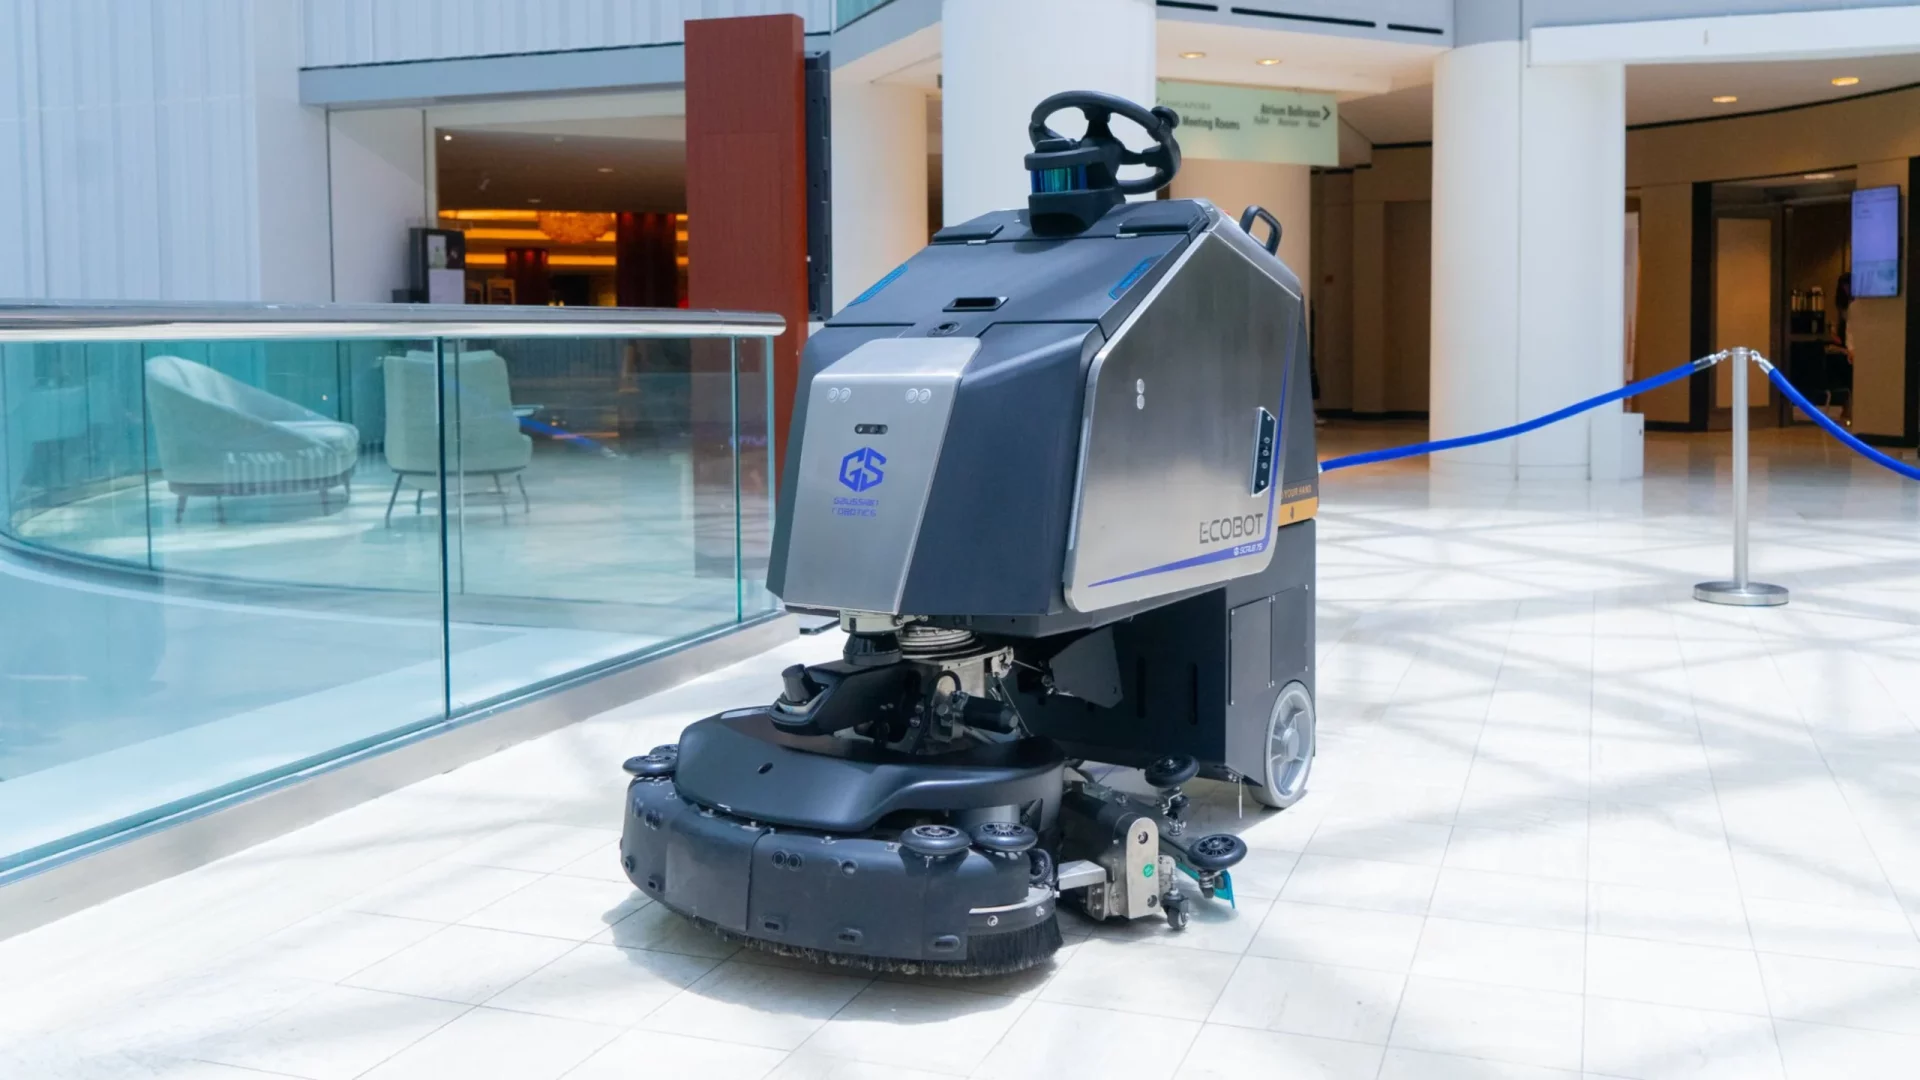 Image of cleaning robot, Scrubber 75, in a venue